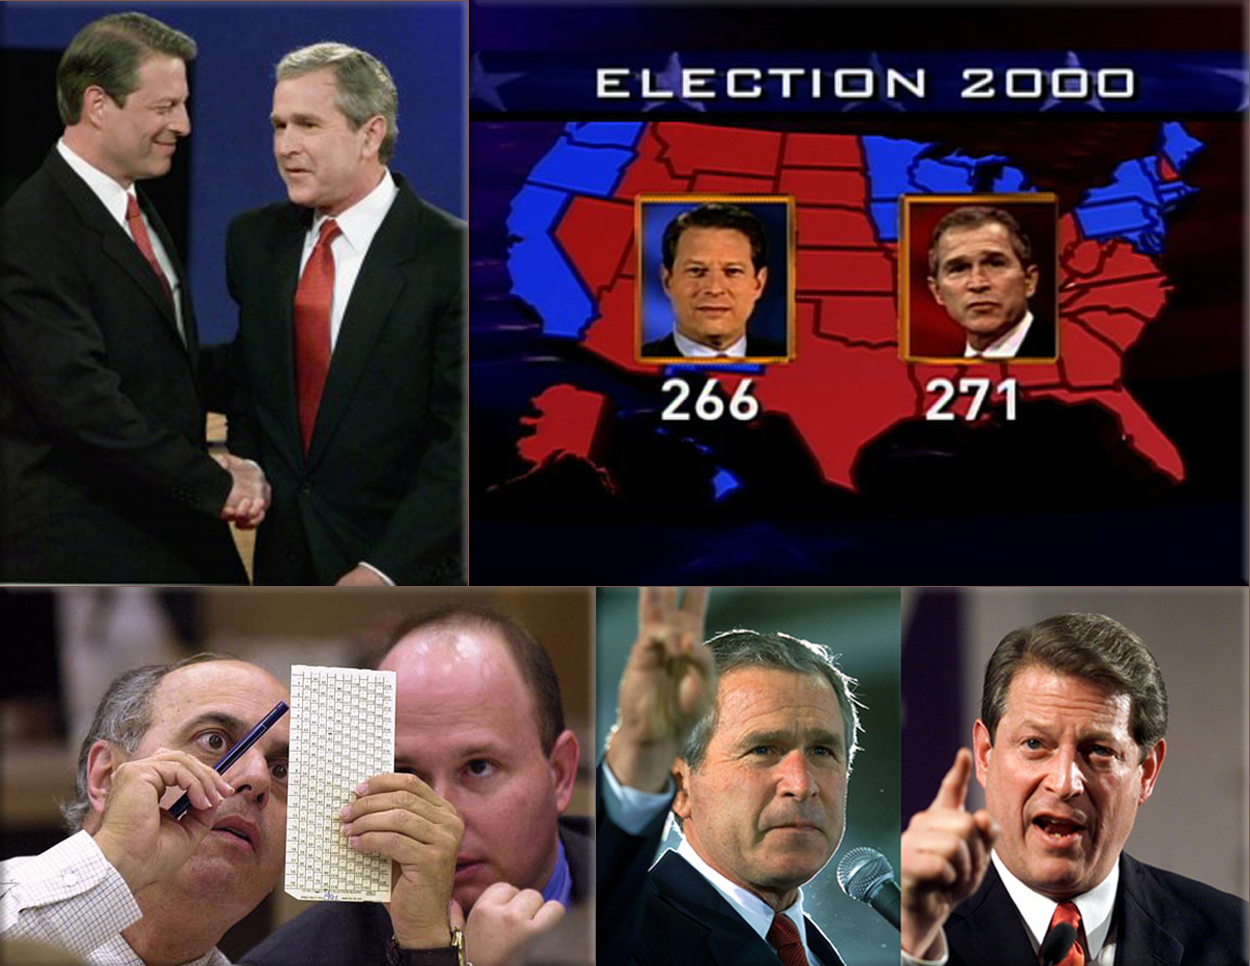 United States presidential election, 2000: was a contest between Republican candidate George W. Bush, the governor of Texas and son of former president George H. W. Bush, and Democratic candidate Al Gore, the Vice President - Voting machines disputed ballots